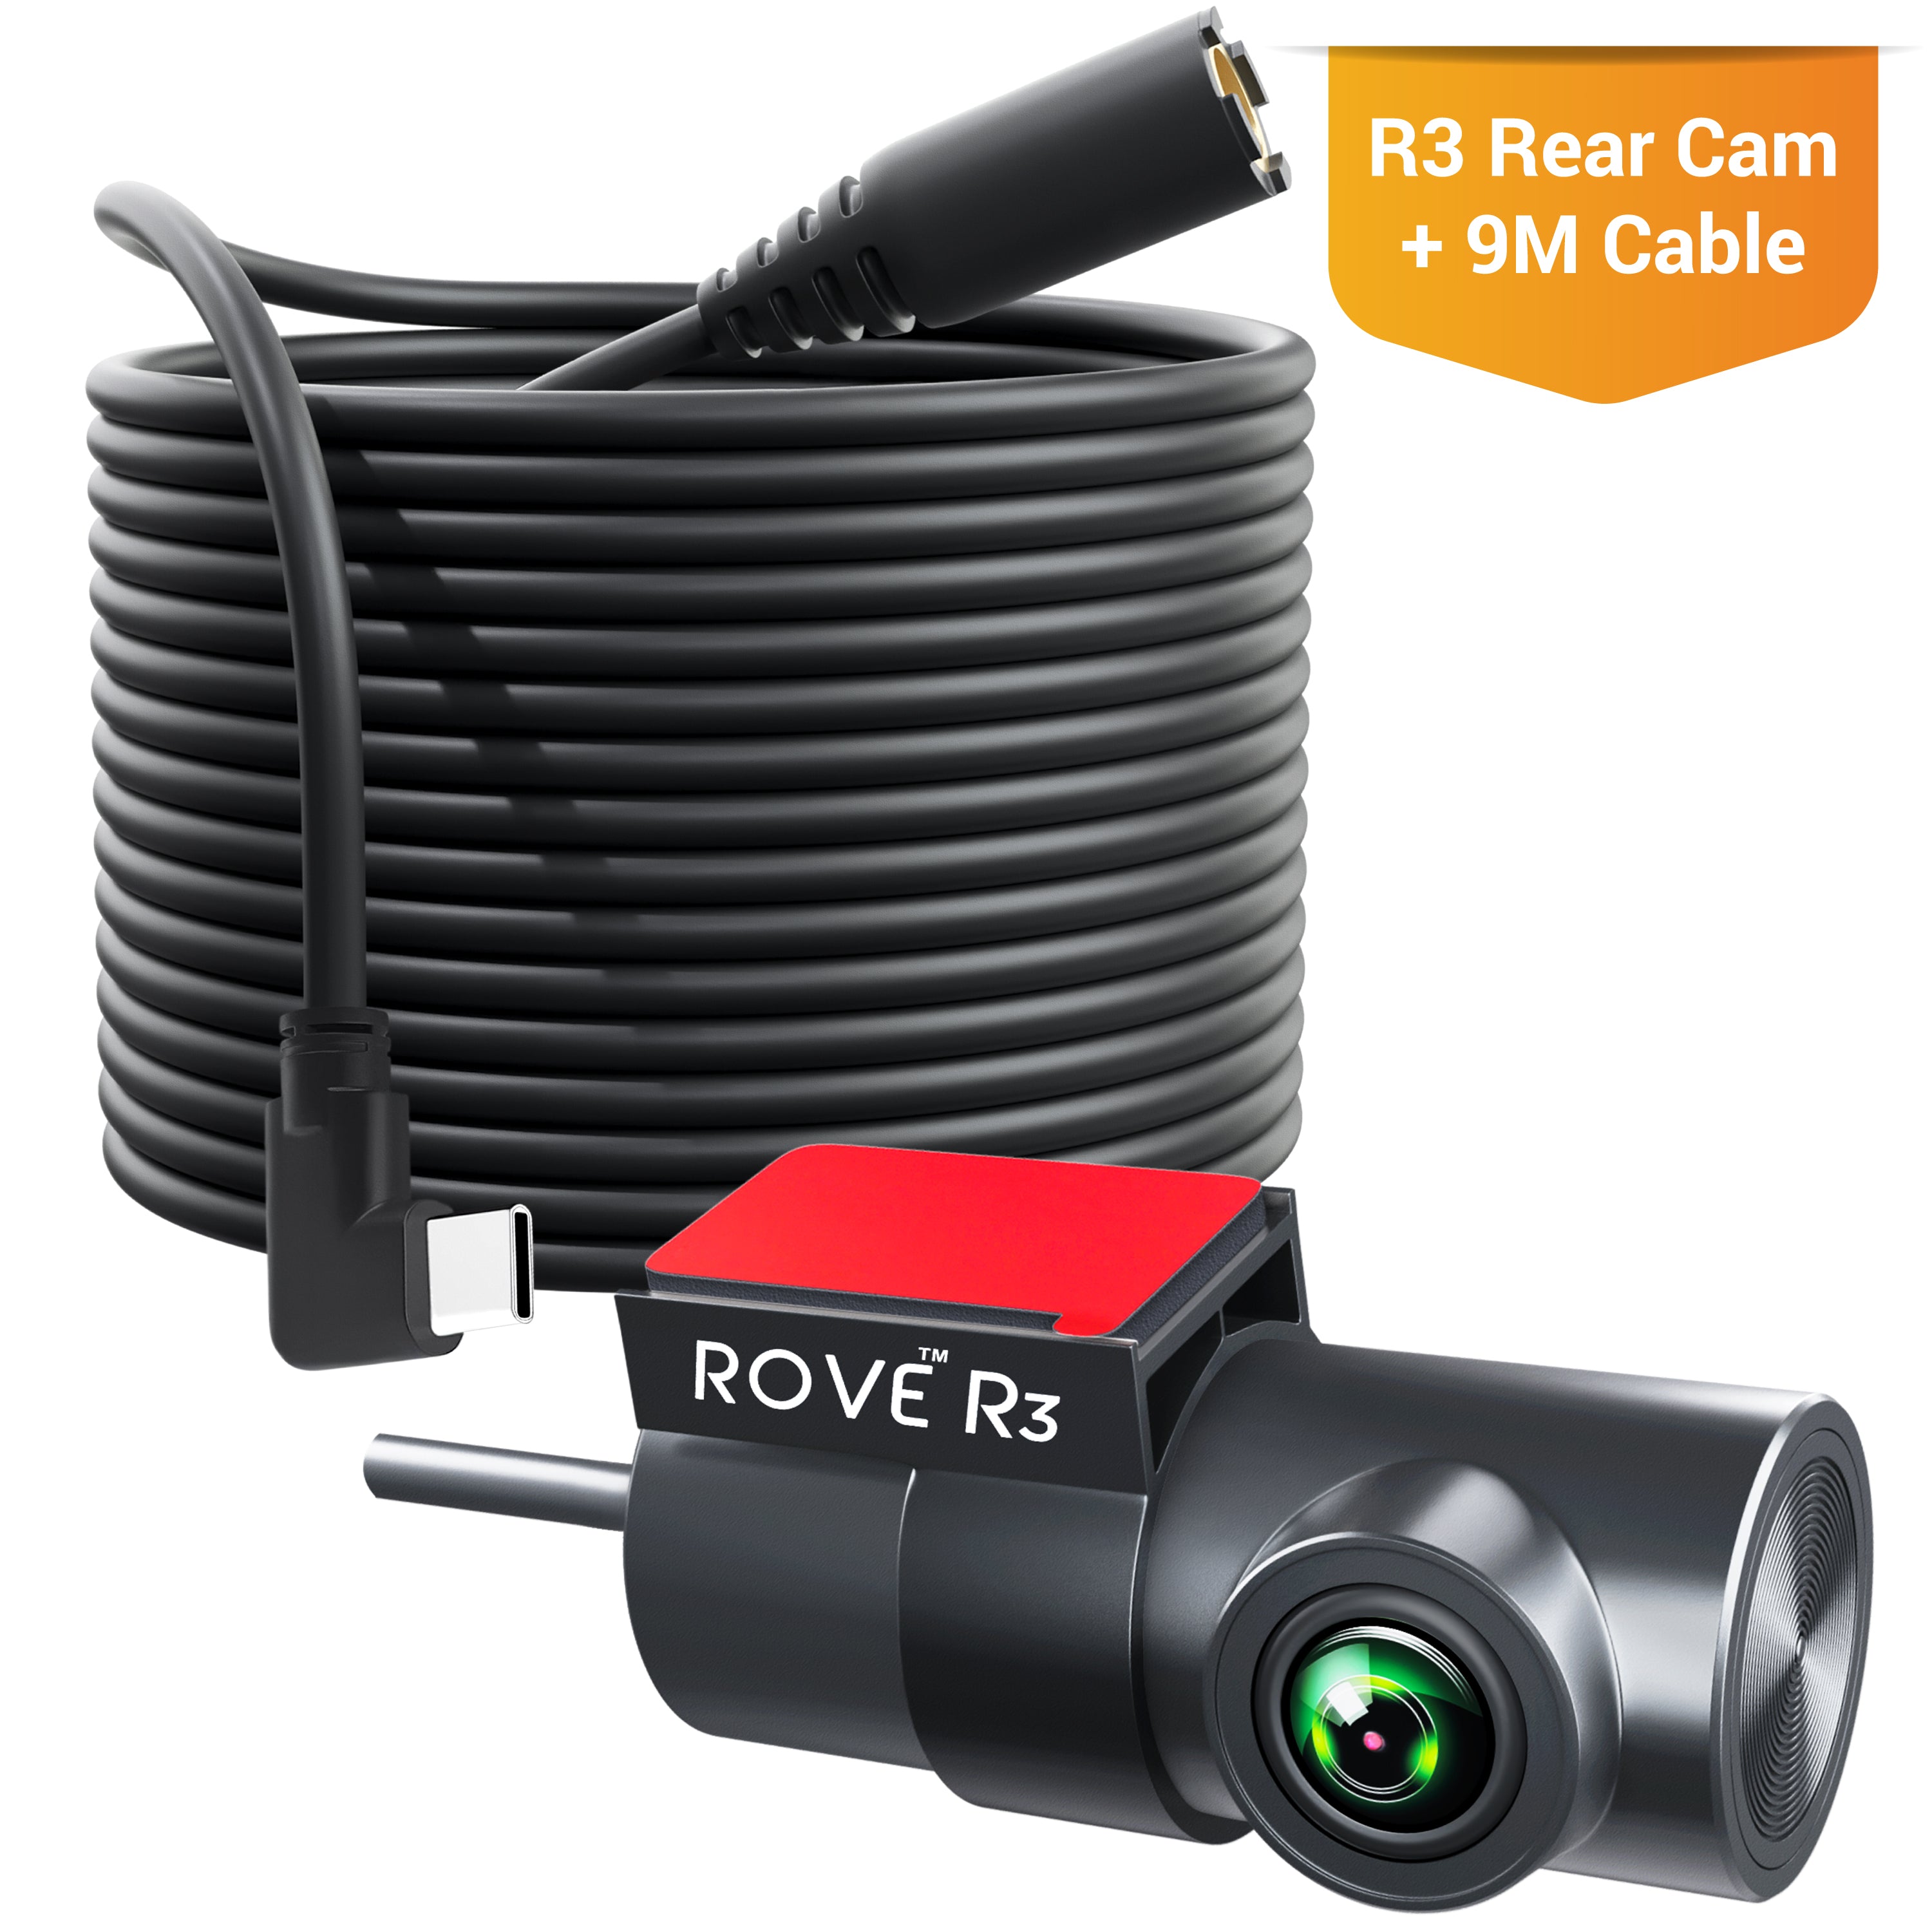 ROVE R3 Rear Cam, 180° Vertically Rotatable, 1080p full HD F1.8-140° Wide Angle and Night Vision enabled, Interior Rear Cam for Car, Truck, Mini RVs and Camper van